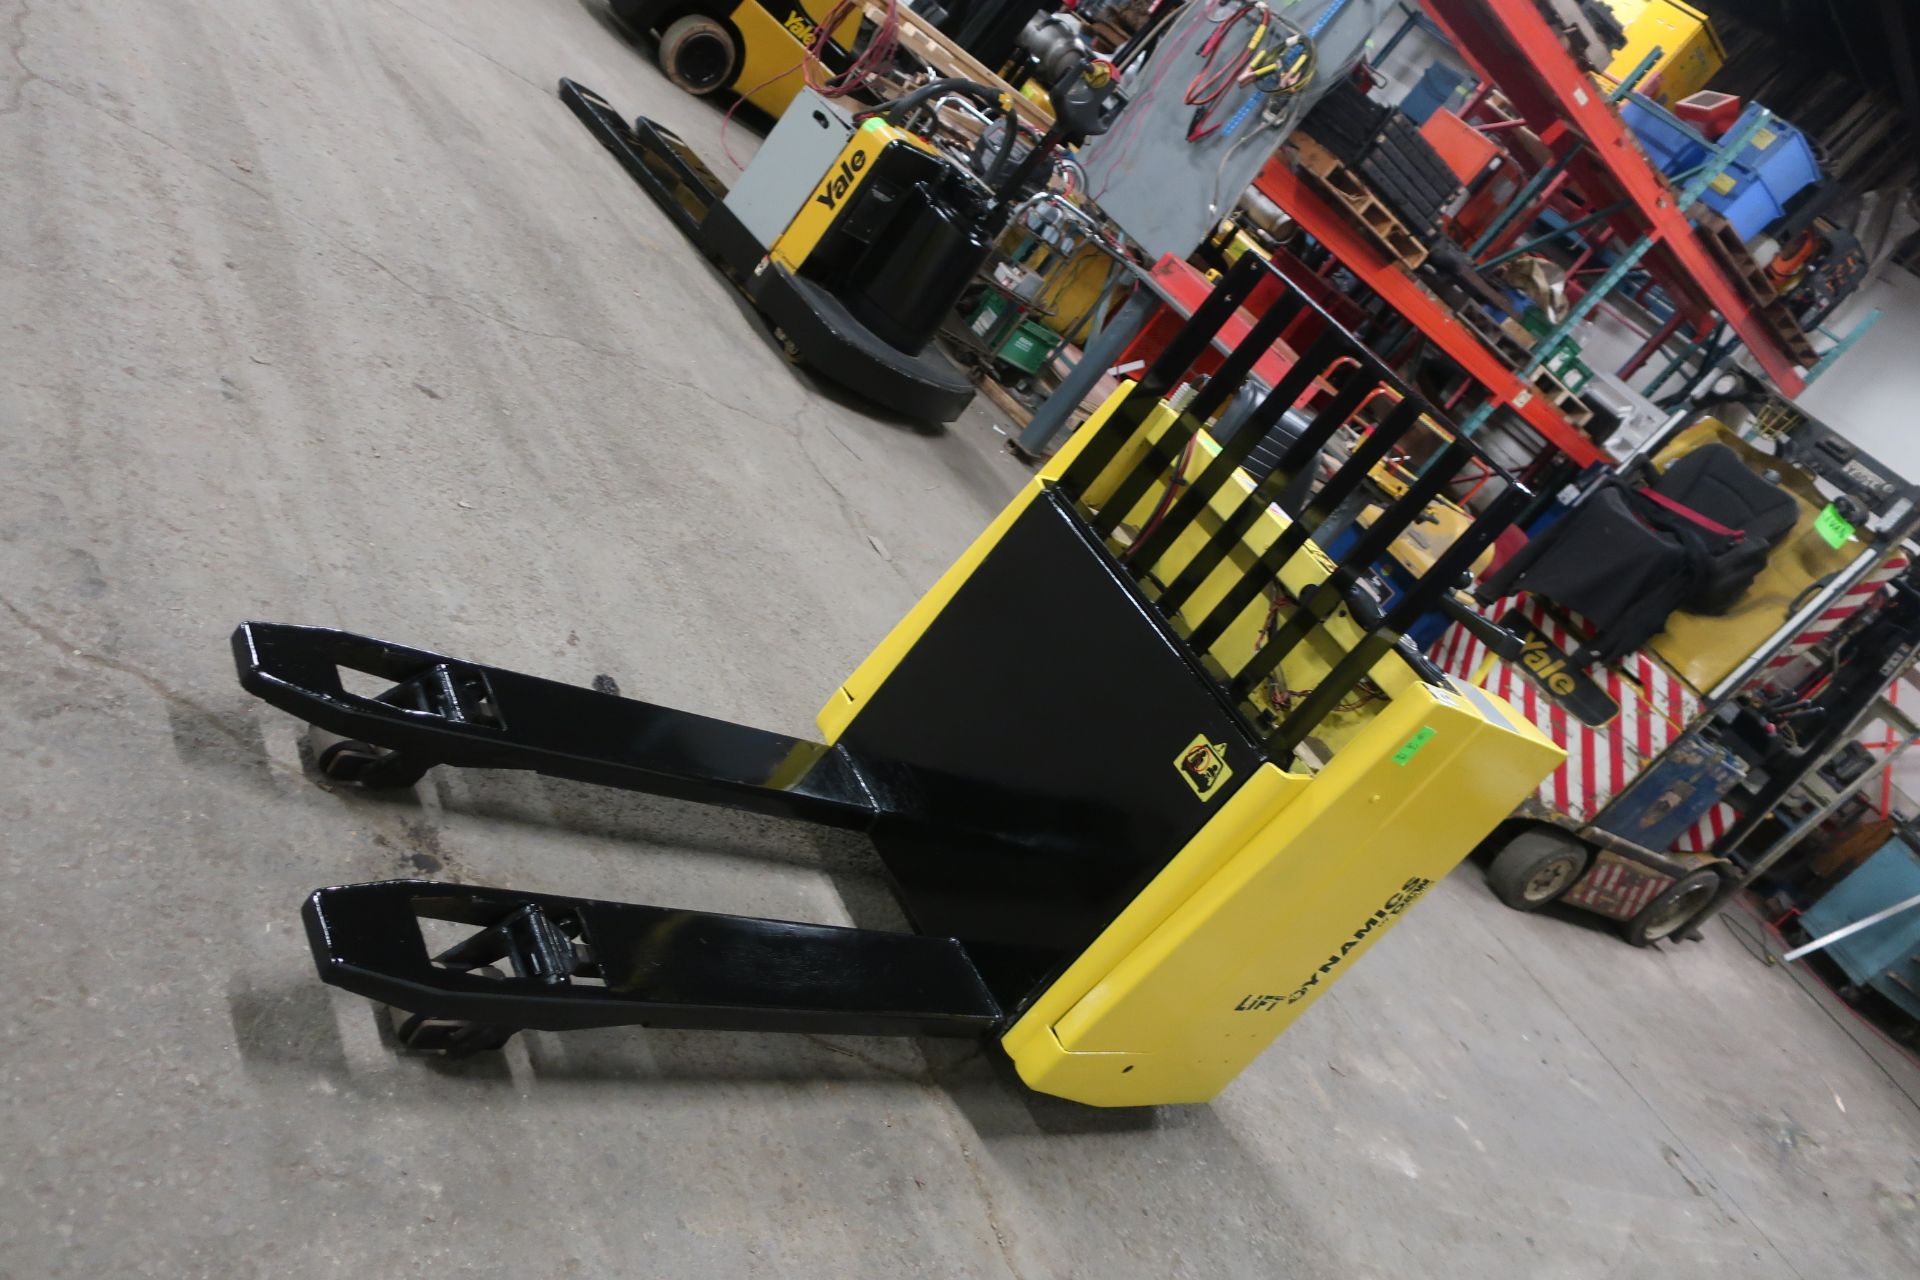 Dynamics Lift Sit down Electric Ride on Powered Pallet Cart Lift 6000lbs capacity safety into 2021 - Image 3 of 3